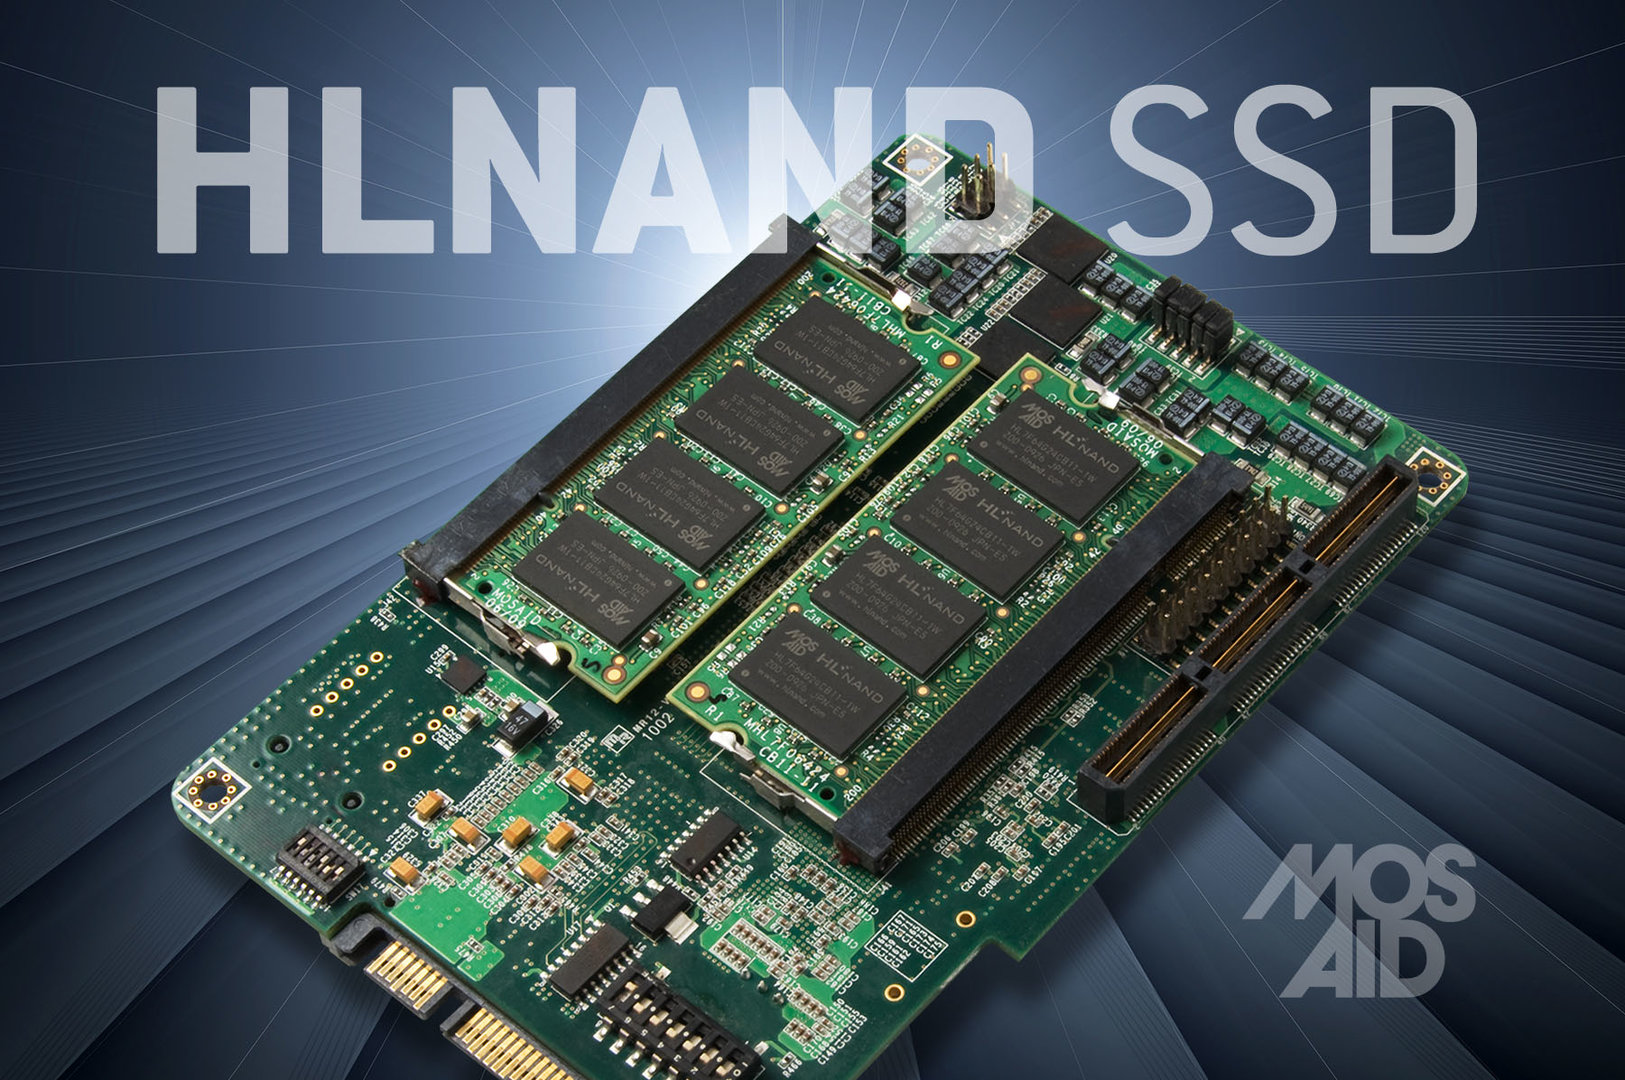 Mosaid HLNAND SSD Prototyp